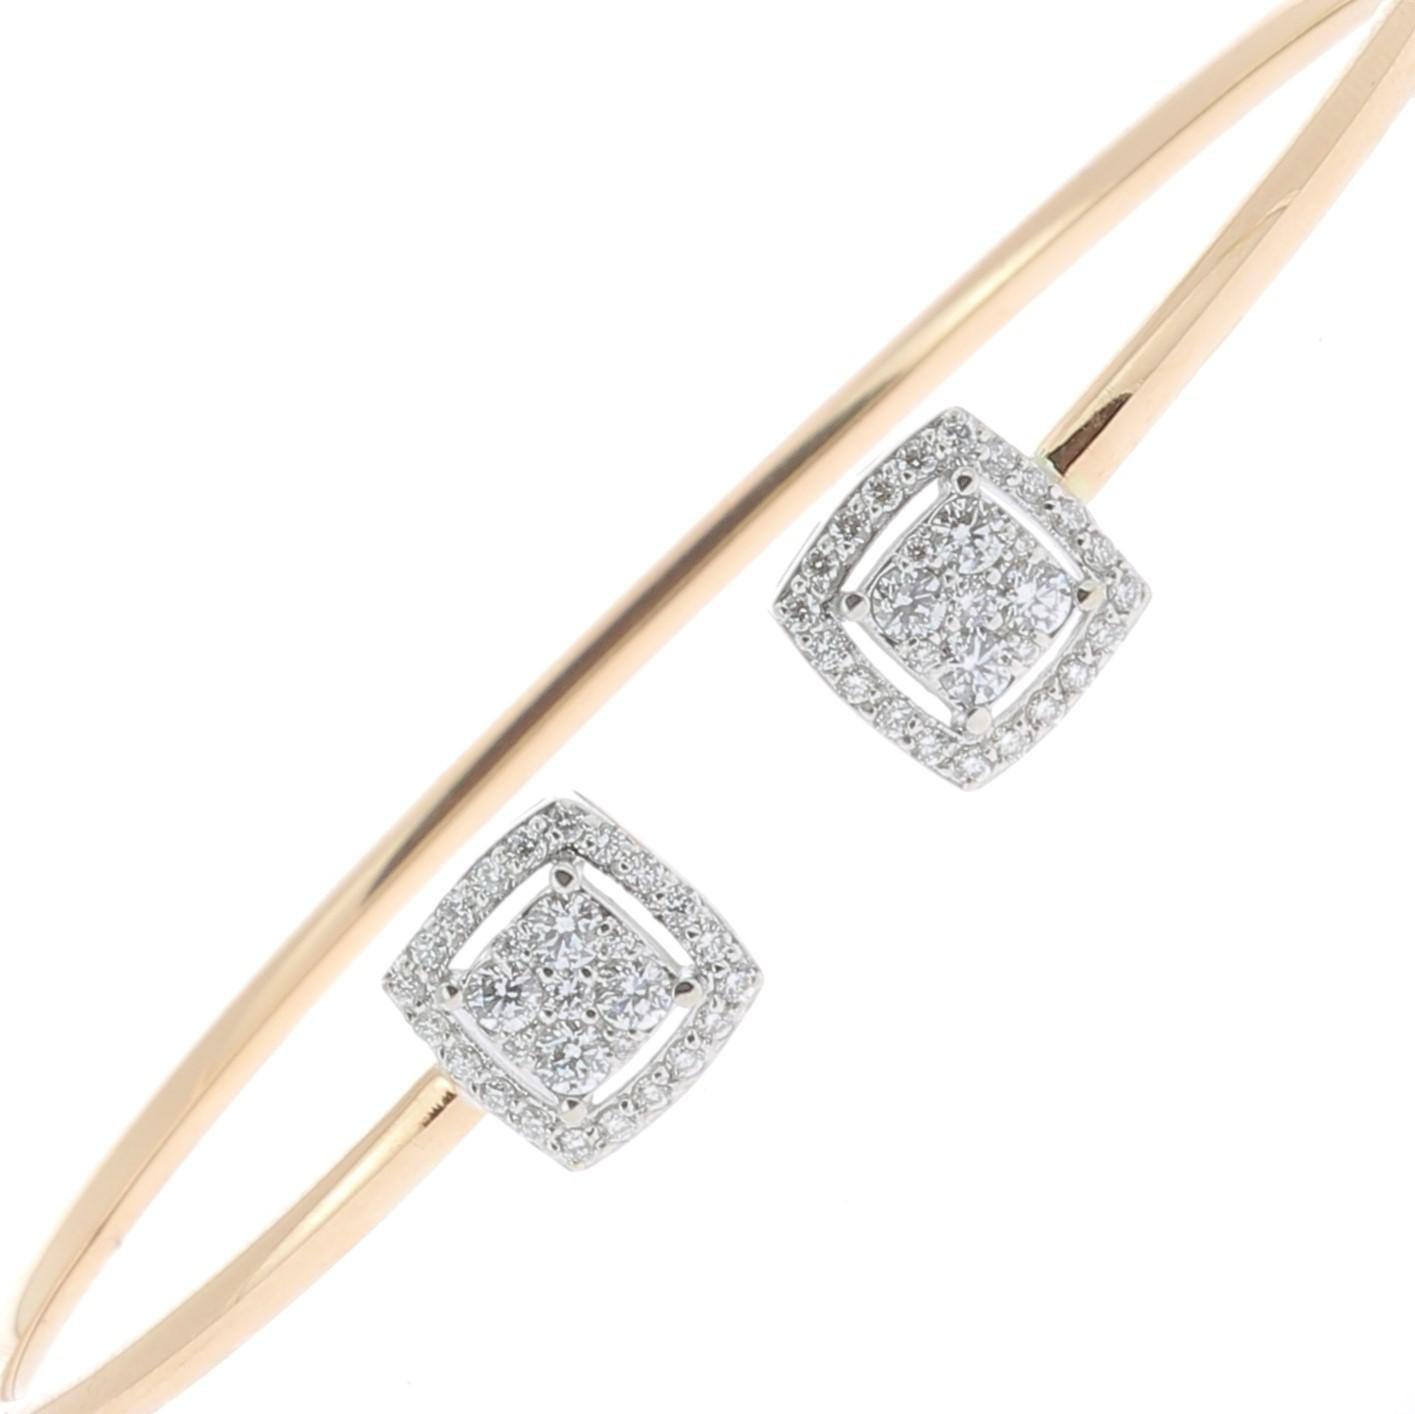 A wonderful Diamond Bangles Bracelet set with Round Diamonds weighing 0.61 Carats.
The Diamonds are GVS quality.
The Bangle Bracelet is made of 18K Yellow Gold.
The Diamond Bracelet weight 4.20 Grams.
The diameter of the Bracelet measures 5.5 Cm/